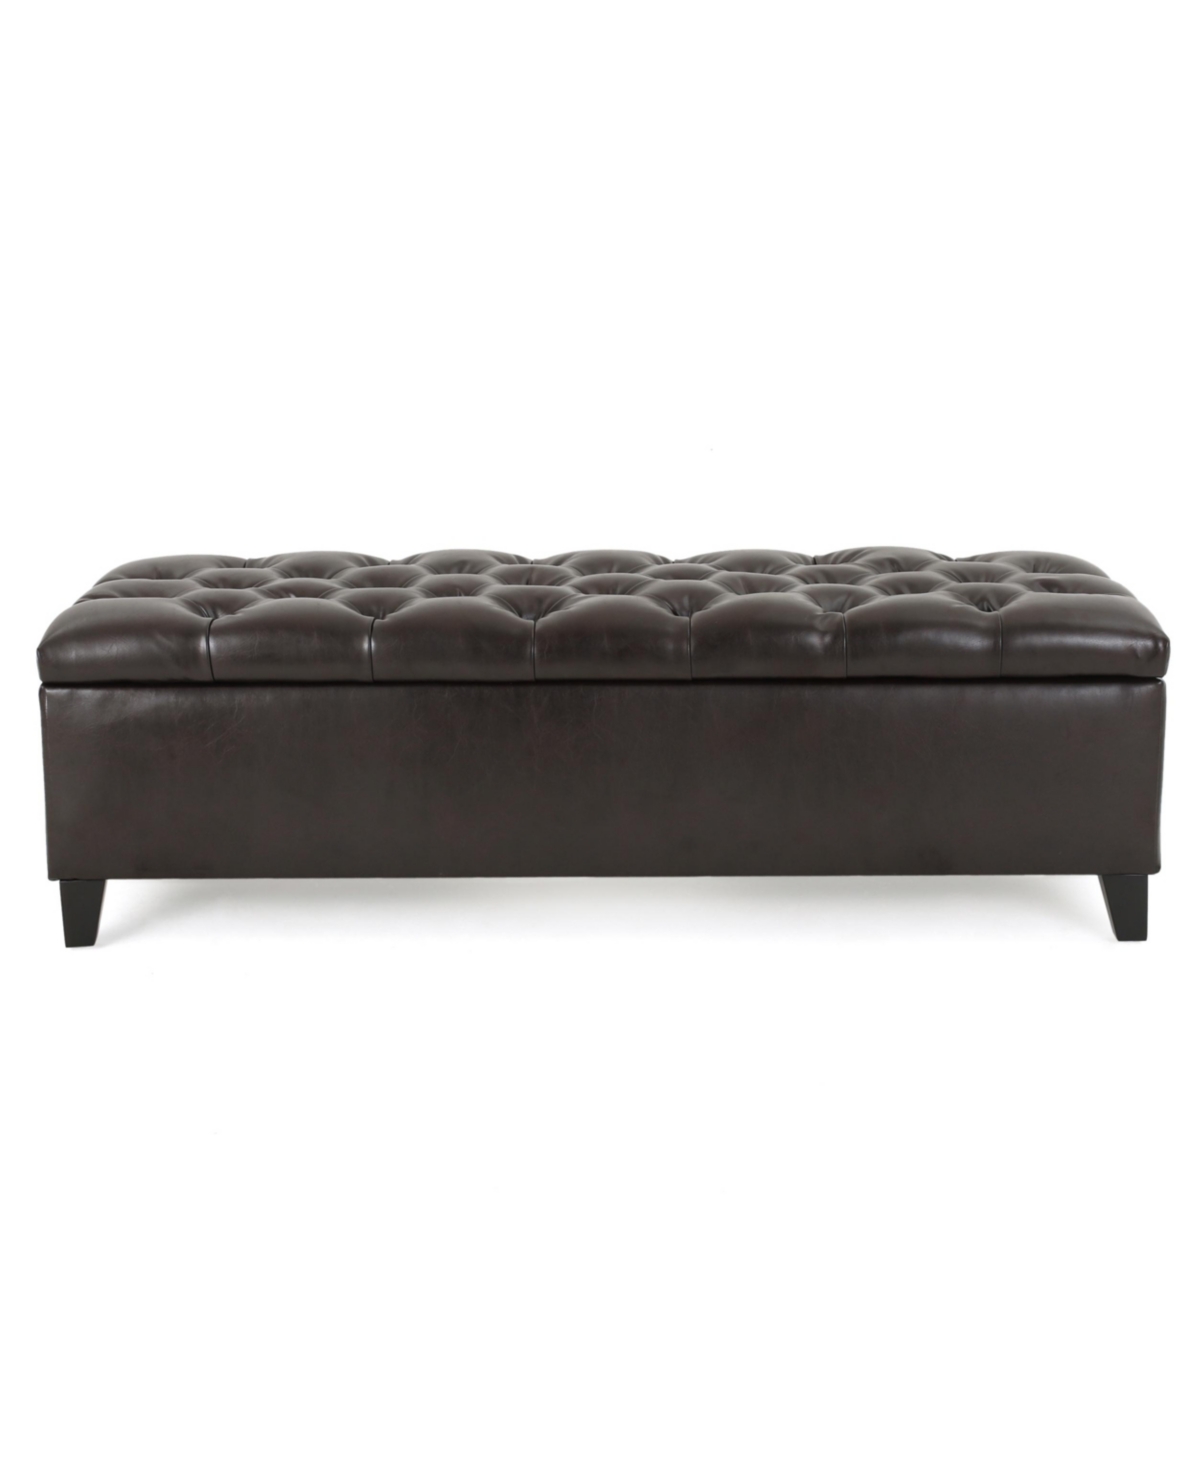 Noble House Ottilie Contemporary Button-tufted Storage Ottoman Bench In Brown